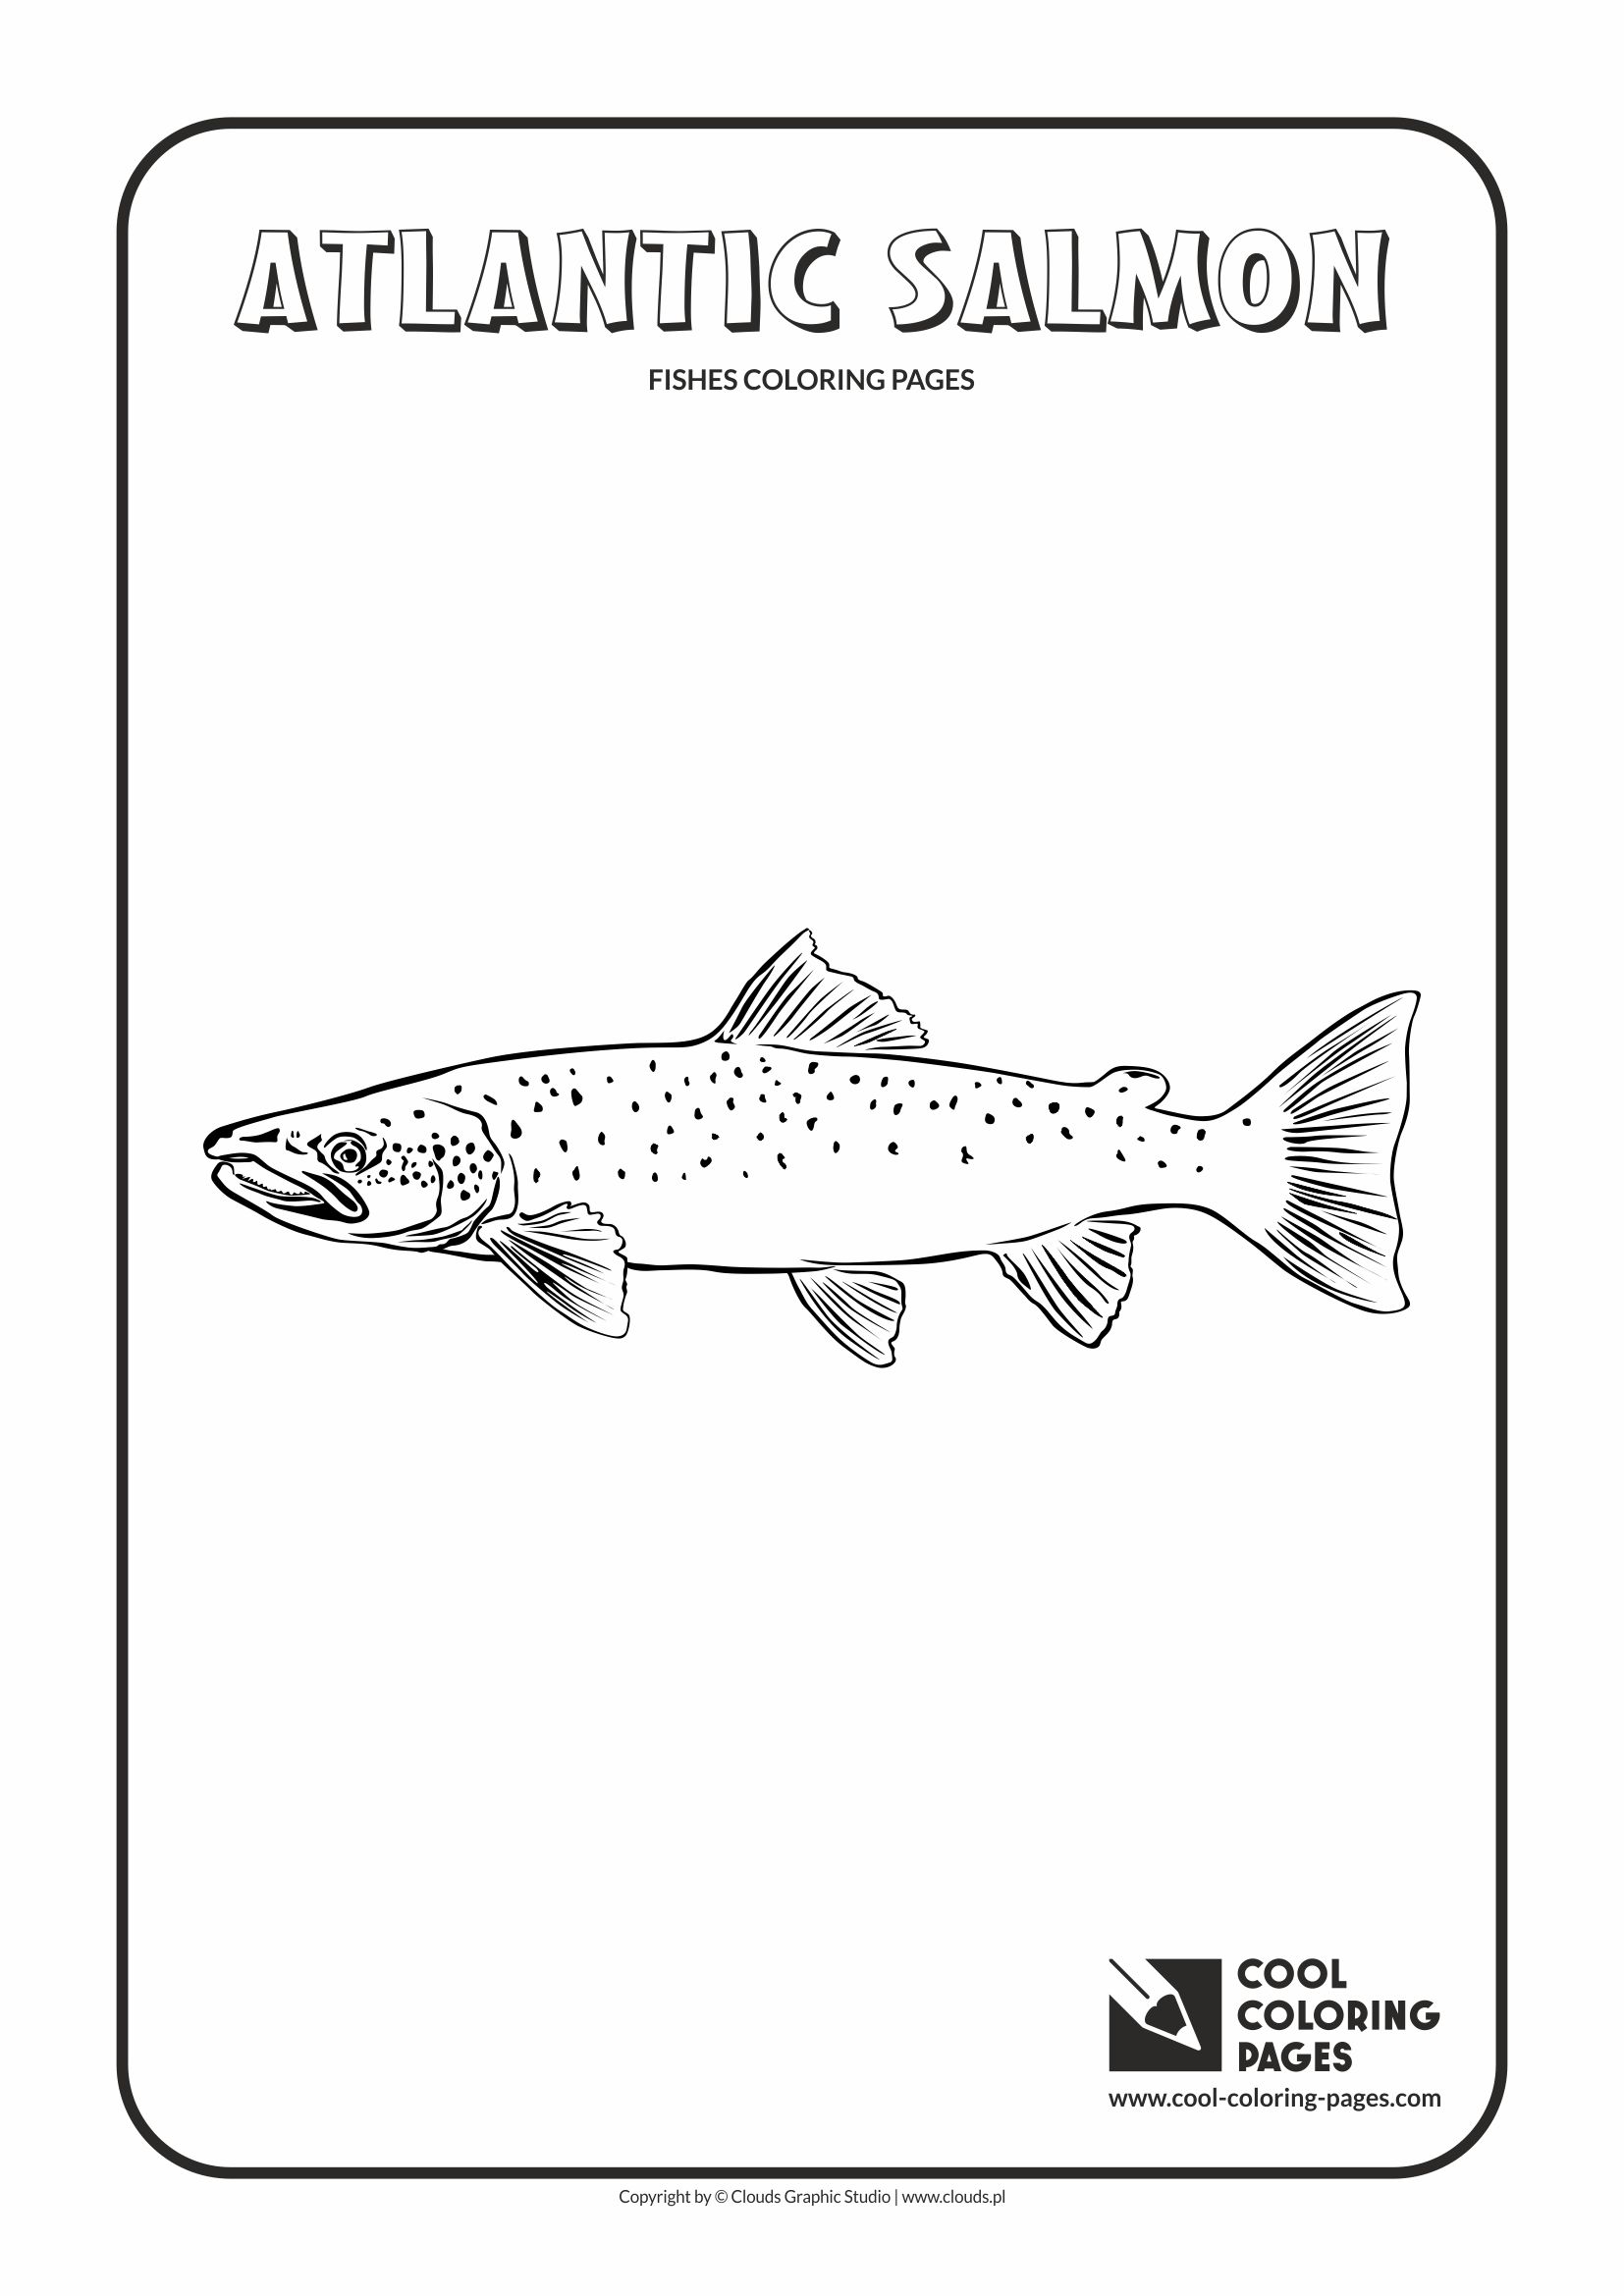 Cool Coloring Pages - Animals / Atlantic salmon / Coloring page with atlantic salmon